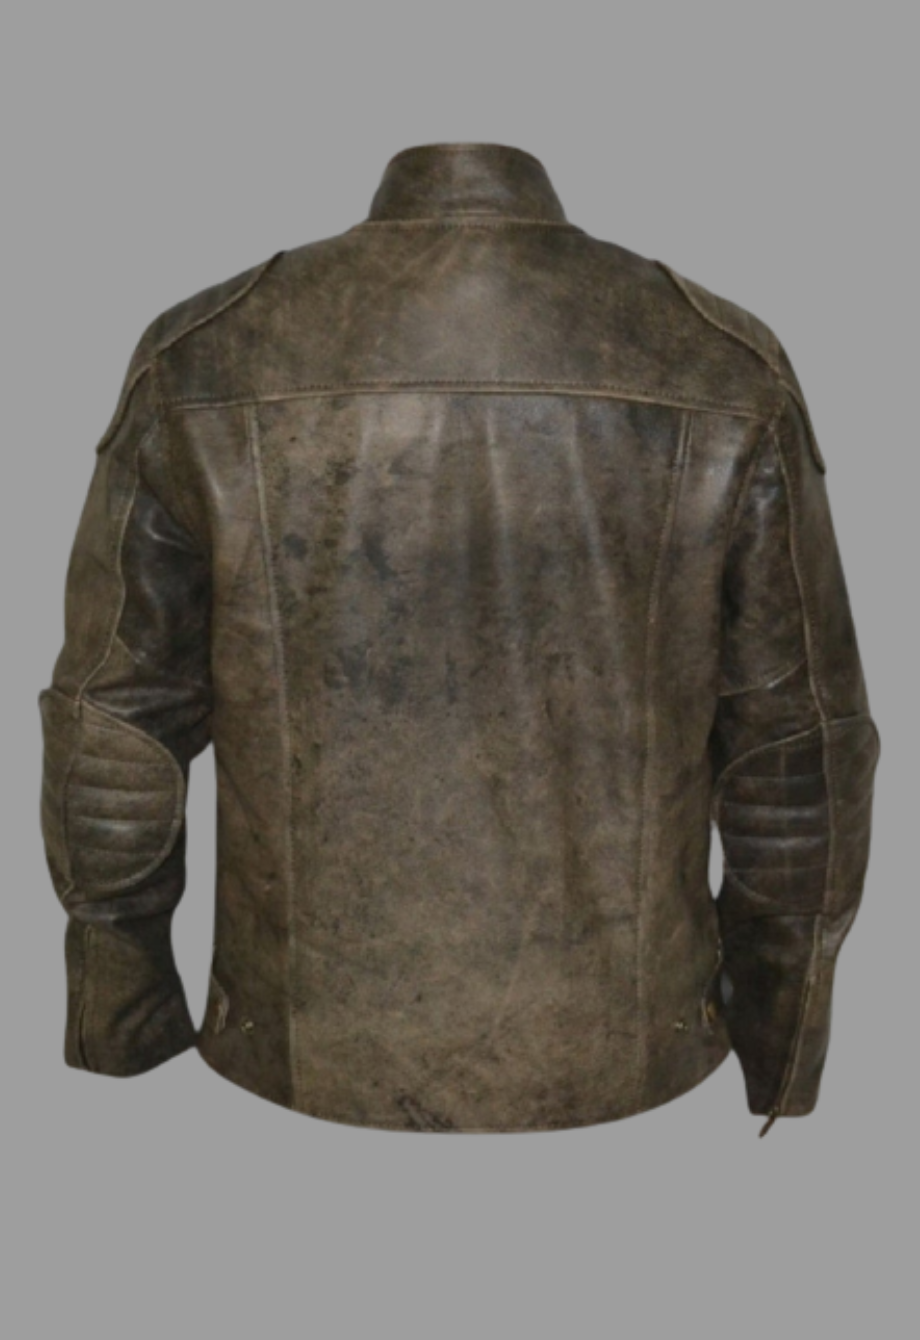 Vintage Distressed Retro Racer Leather Jacket – South Beach Leather